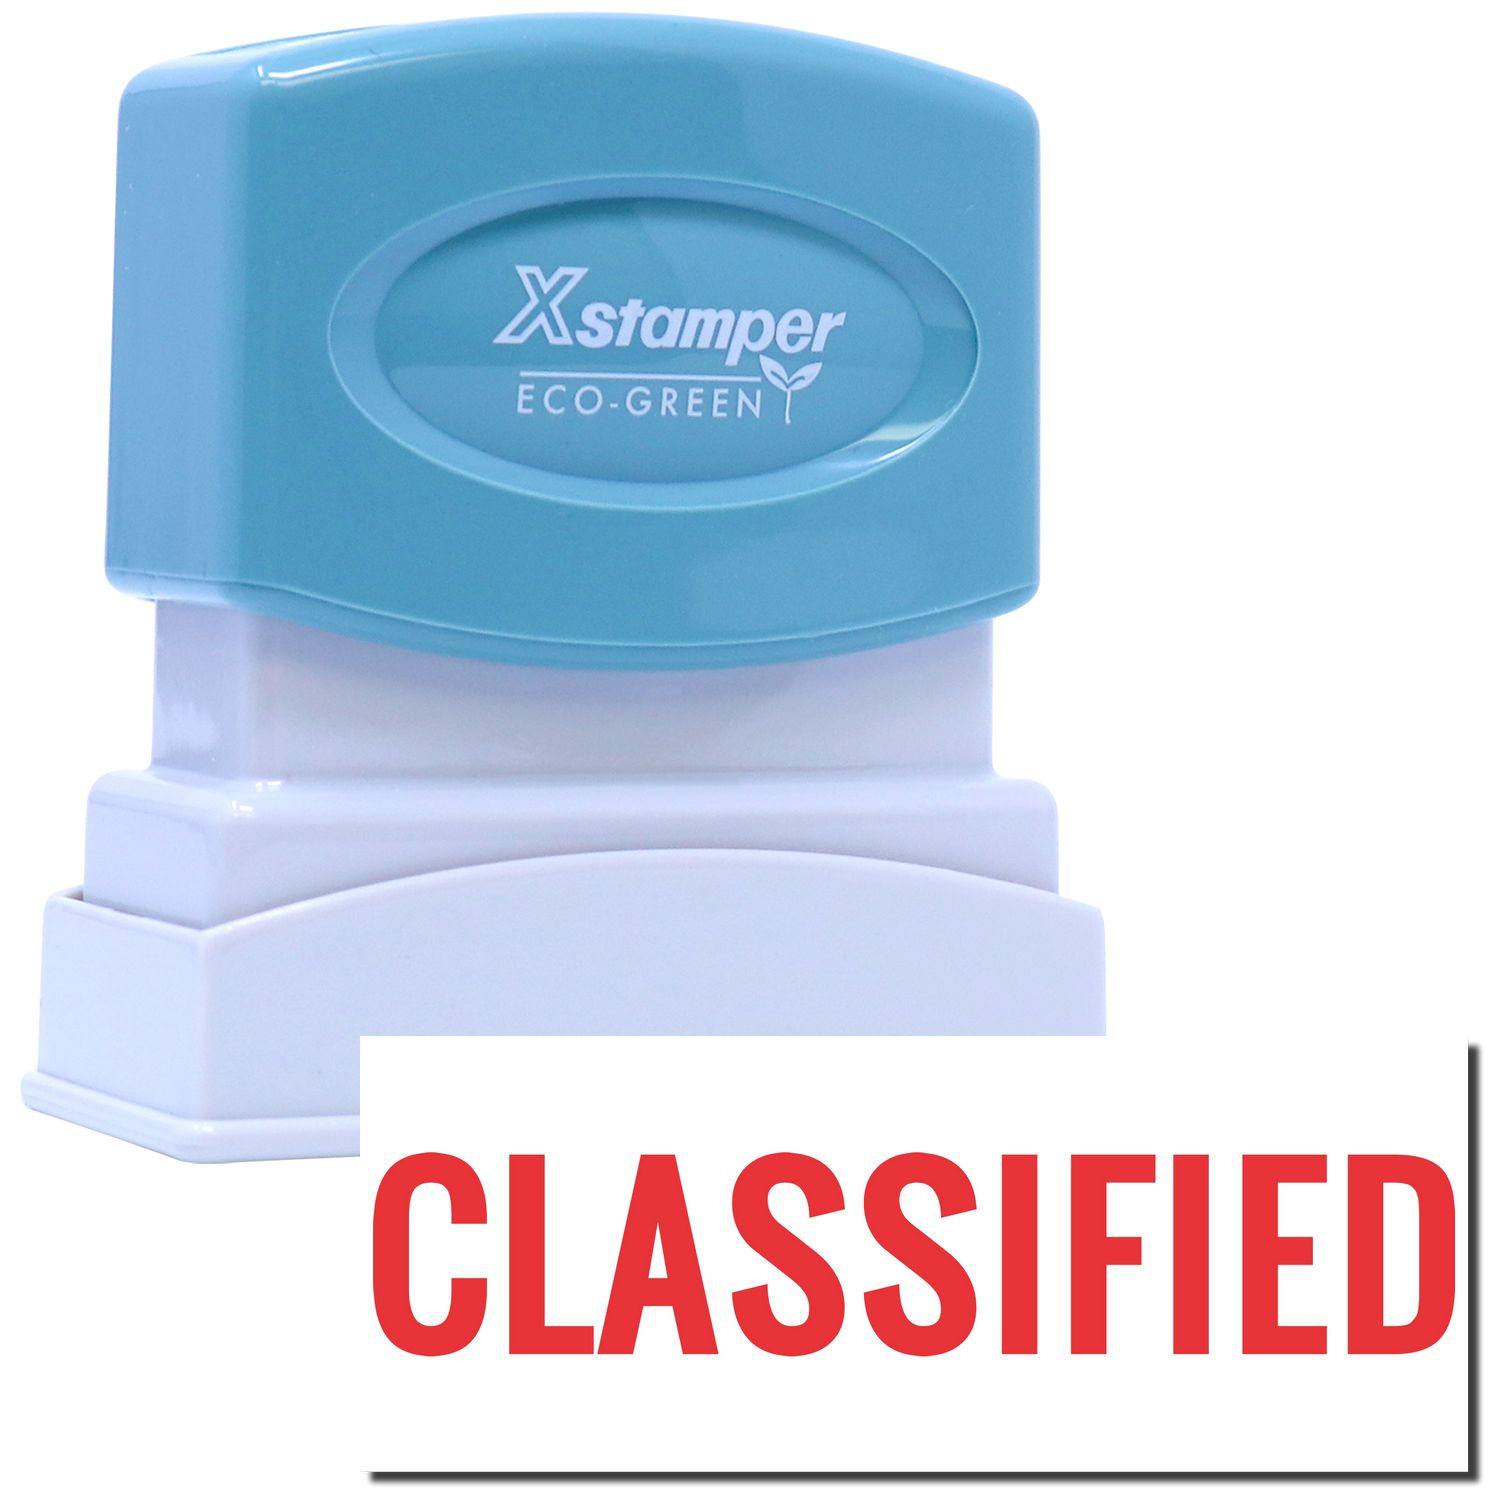 Classified Xstamper Stamp Main Image